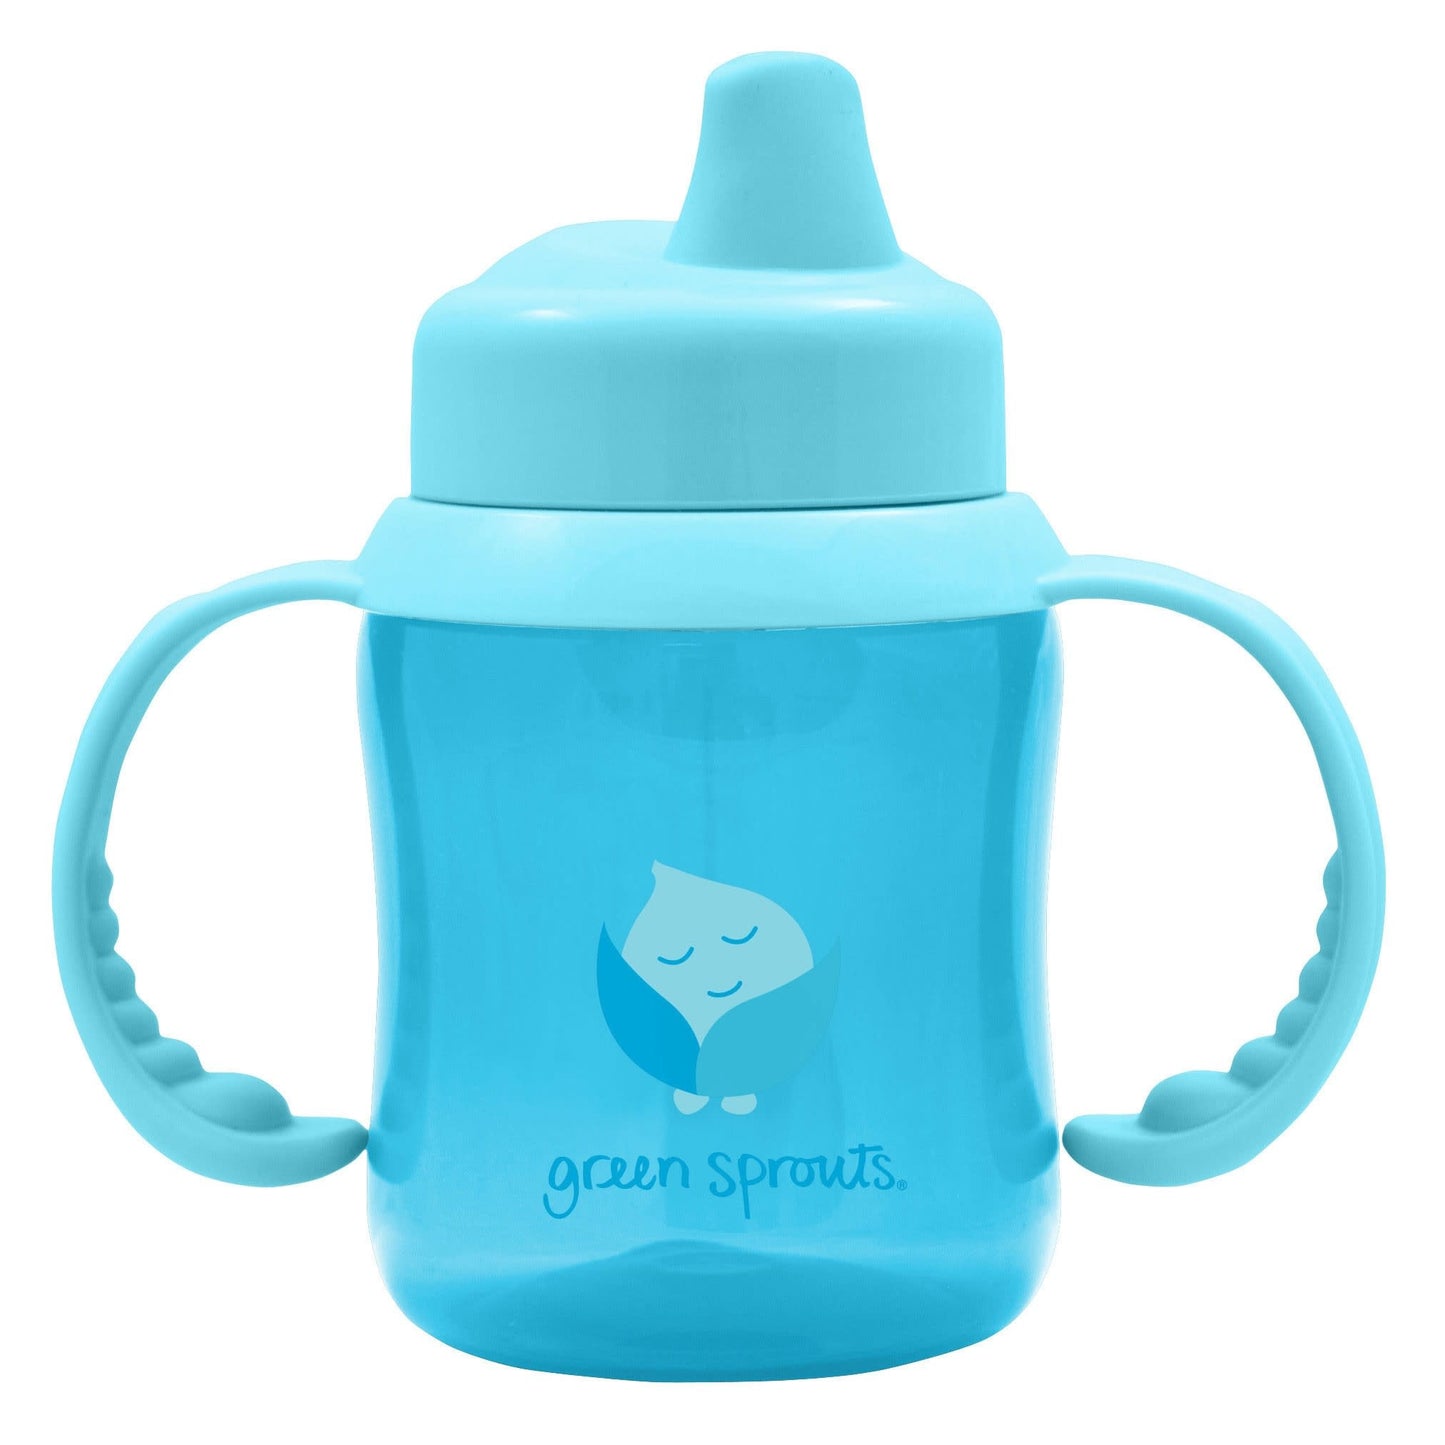 Green Sprouts Non Spill Sippy Cup